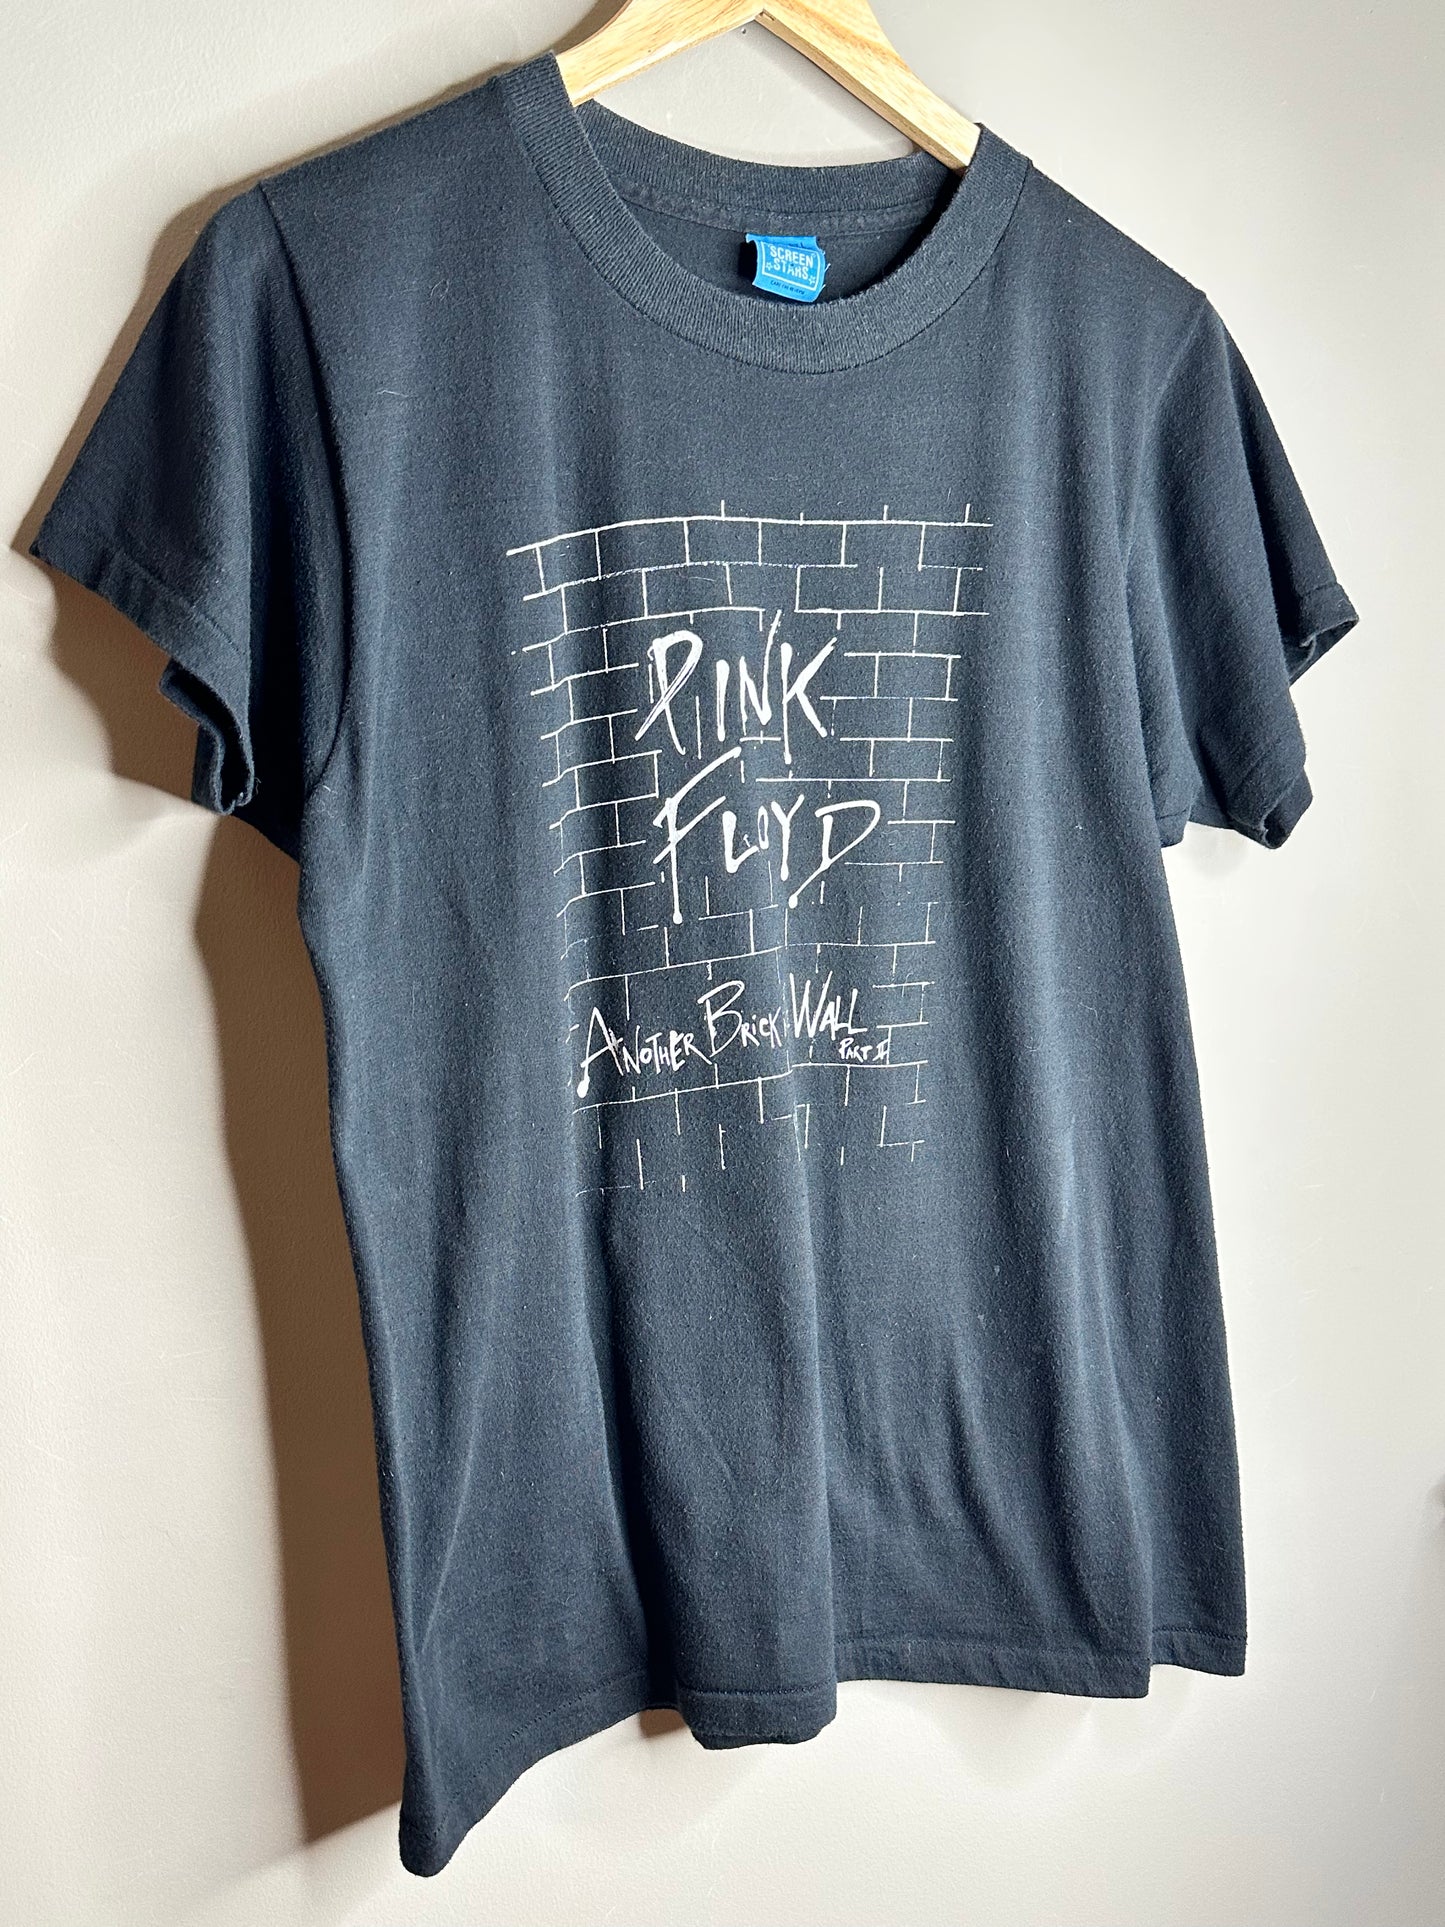 Vintage 1980 PINK FLOYD Another Brick In The Walk t-shirt L